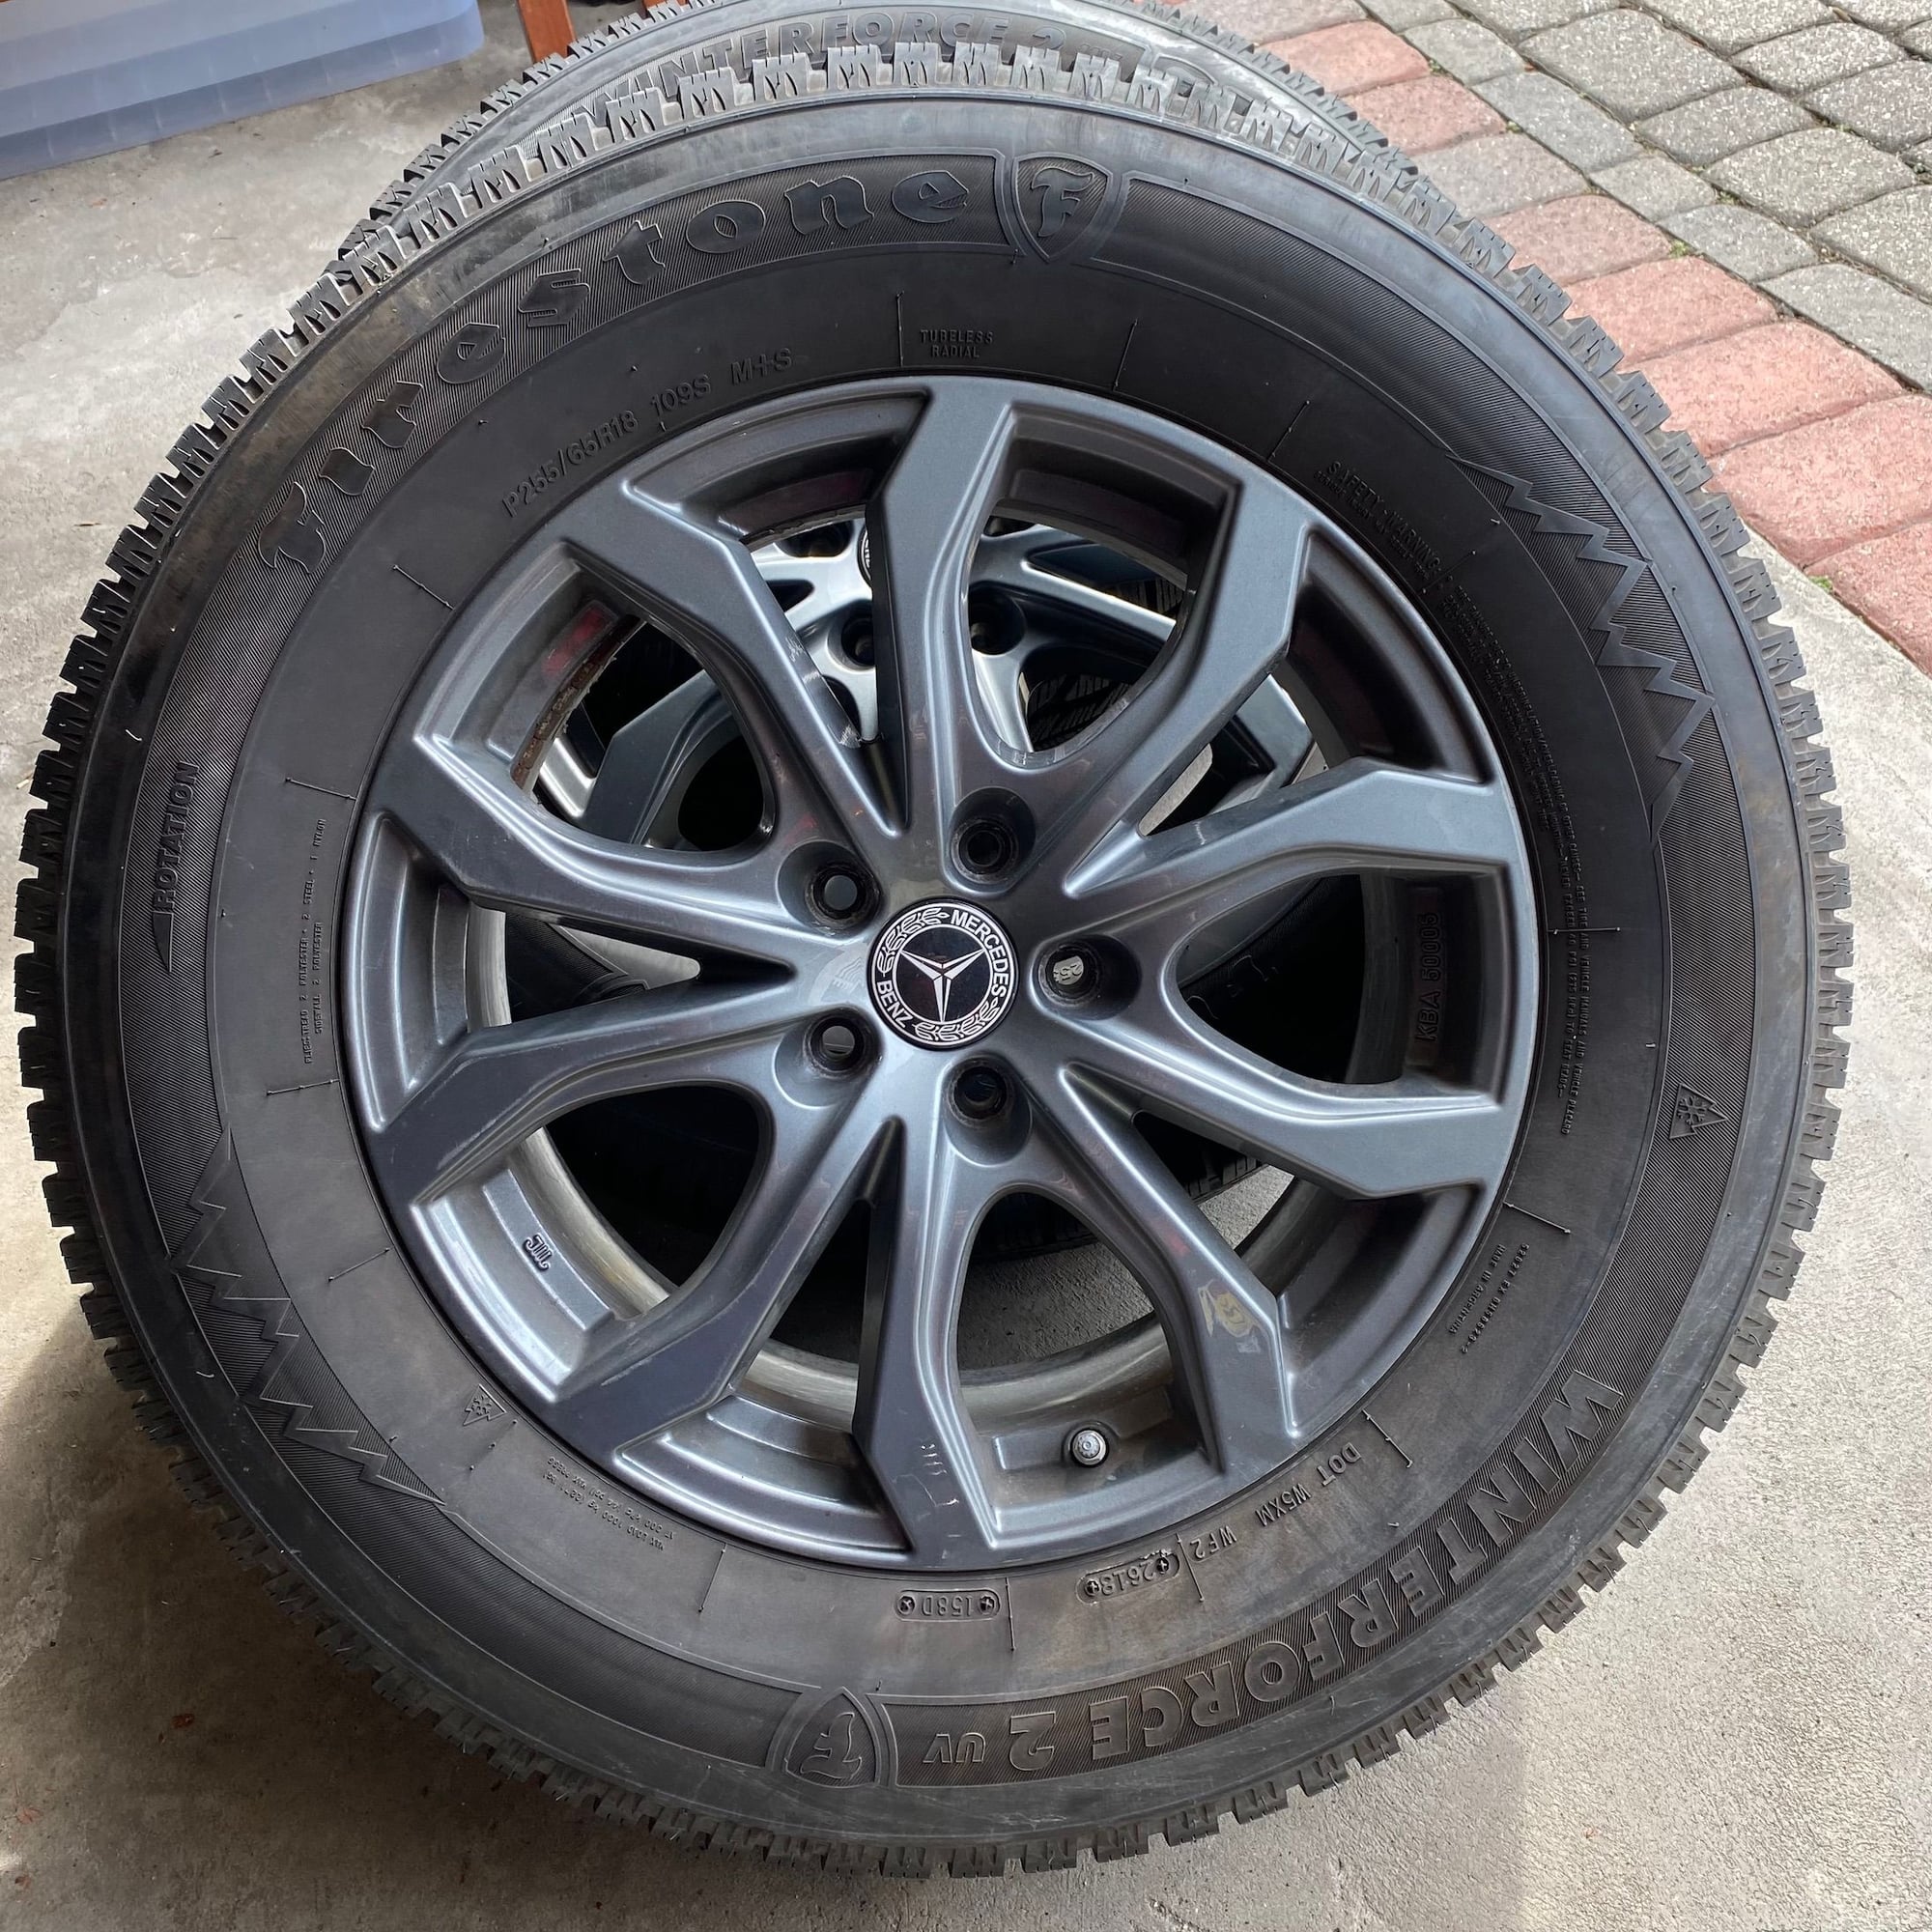 Wheels and Tires/Axles - Winter tires on 18" rims w/ TPMS GL/GLS X166 GLE W166 - Used - 2013 to 2019 Mercedes-Benz GLS-Class - 2011 to 2019 Mercedes-Benz GLE-Class - Chatham, NJ 07928, United States